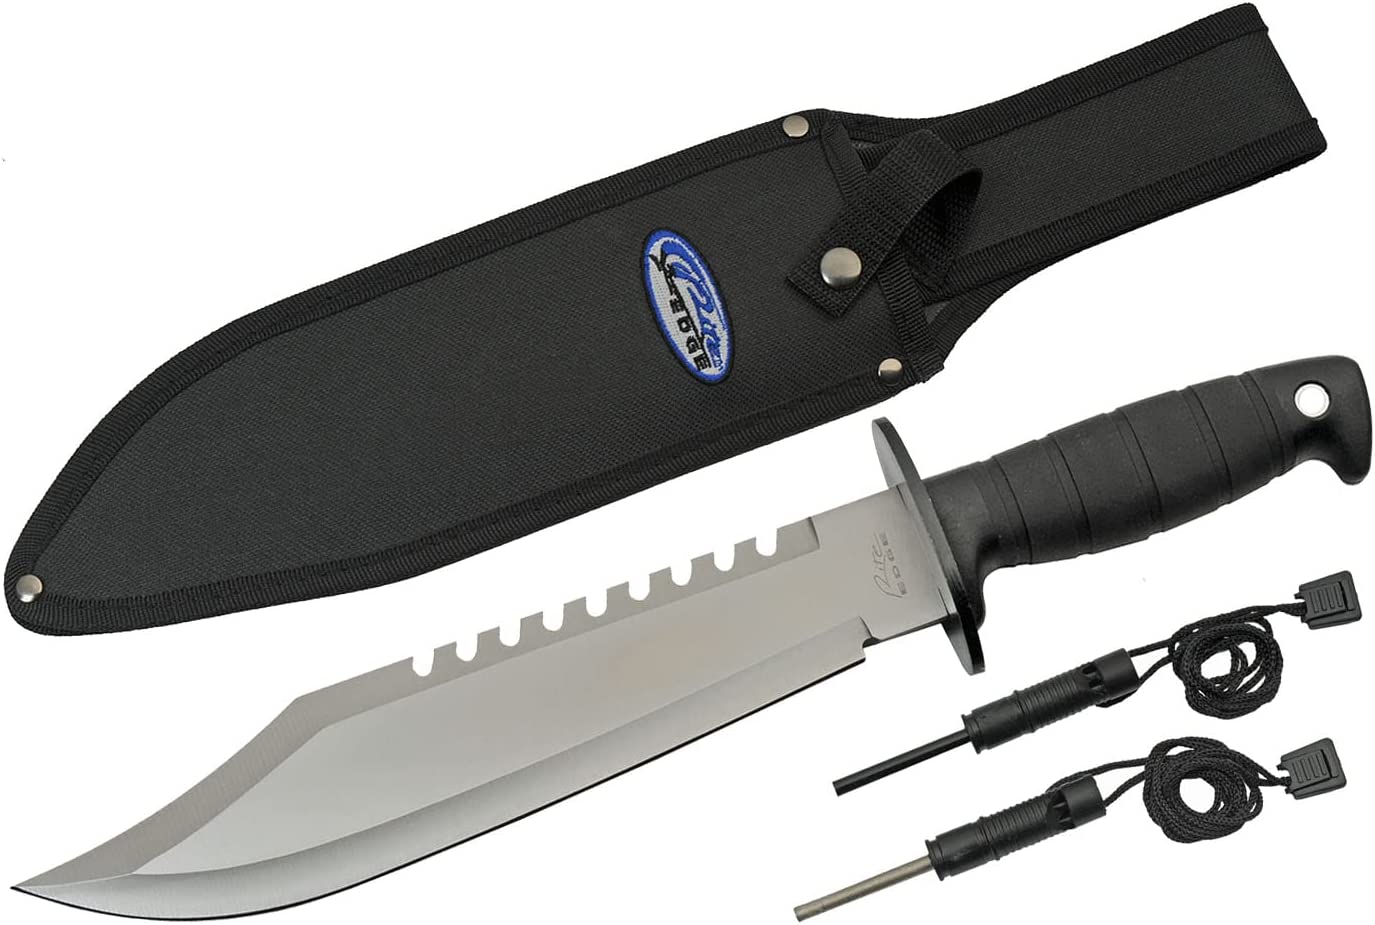 Szco Supplies 15” Rite Edge USA Survival Knife Saw-Back Outdoor Hunting, Camping Knife with Firestarter, Sharpener and Nylon Sheath Black , 211539